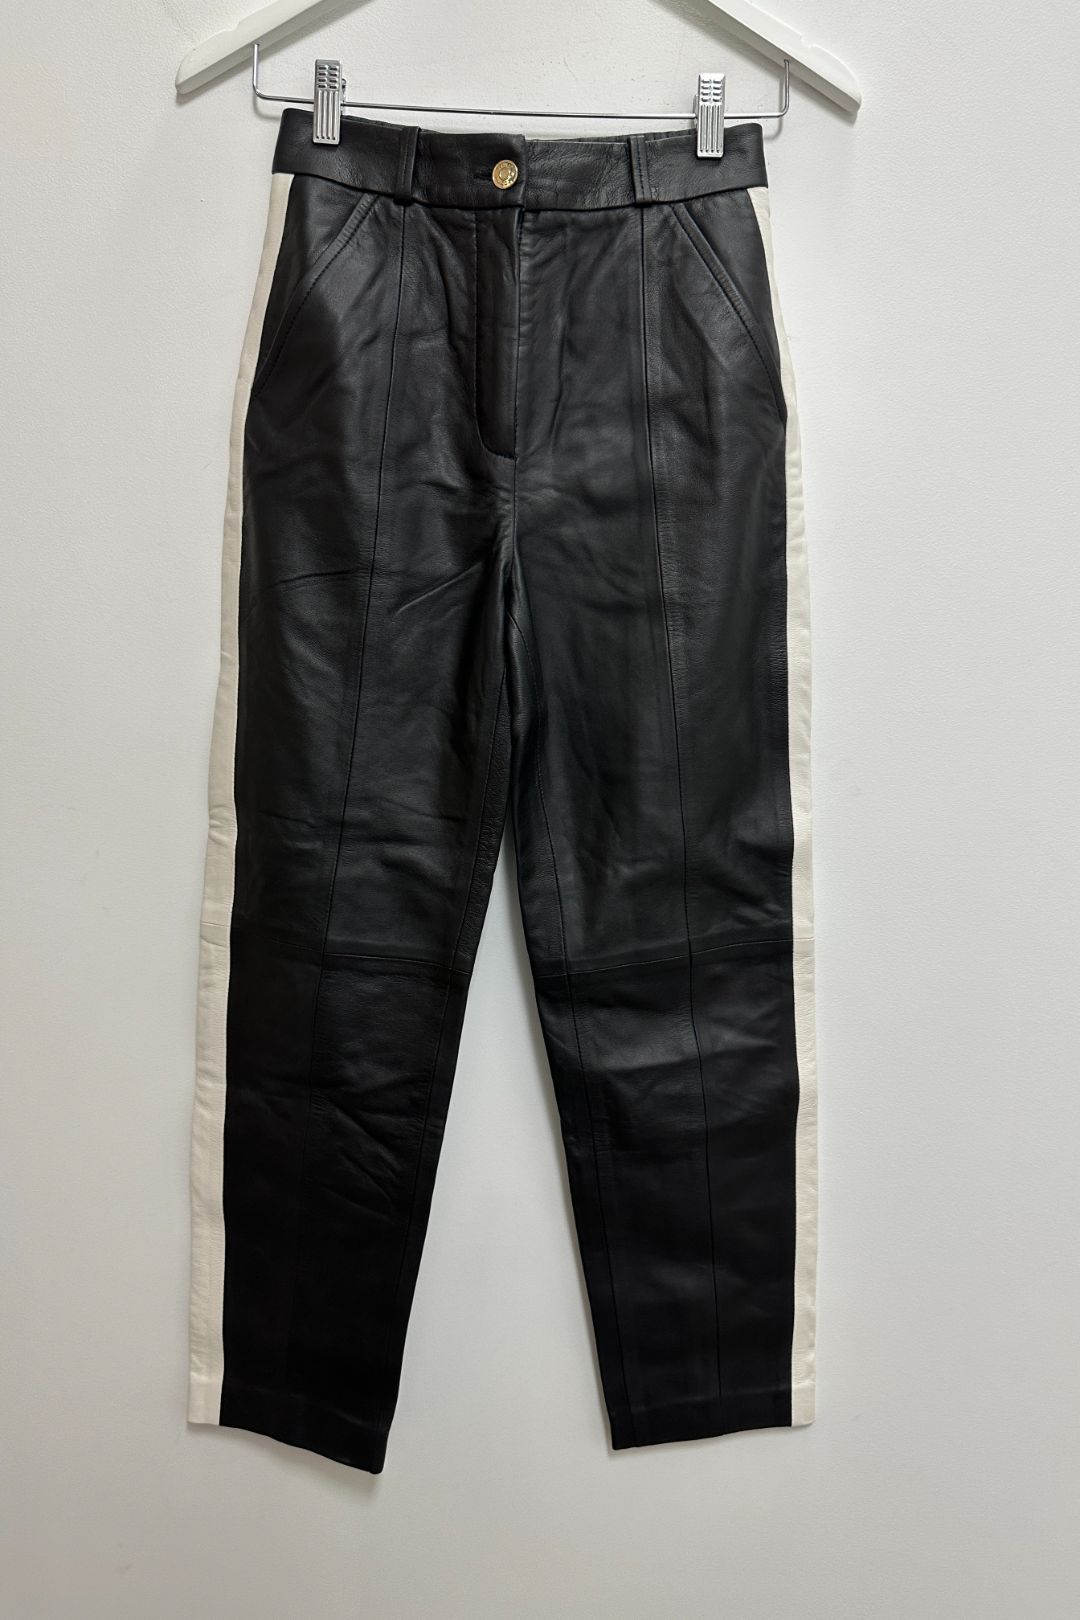 Tommy Hilfiger Pamela Leather Pull-On Pants in Black and White